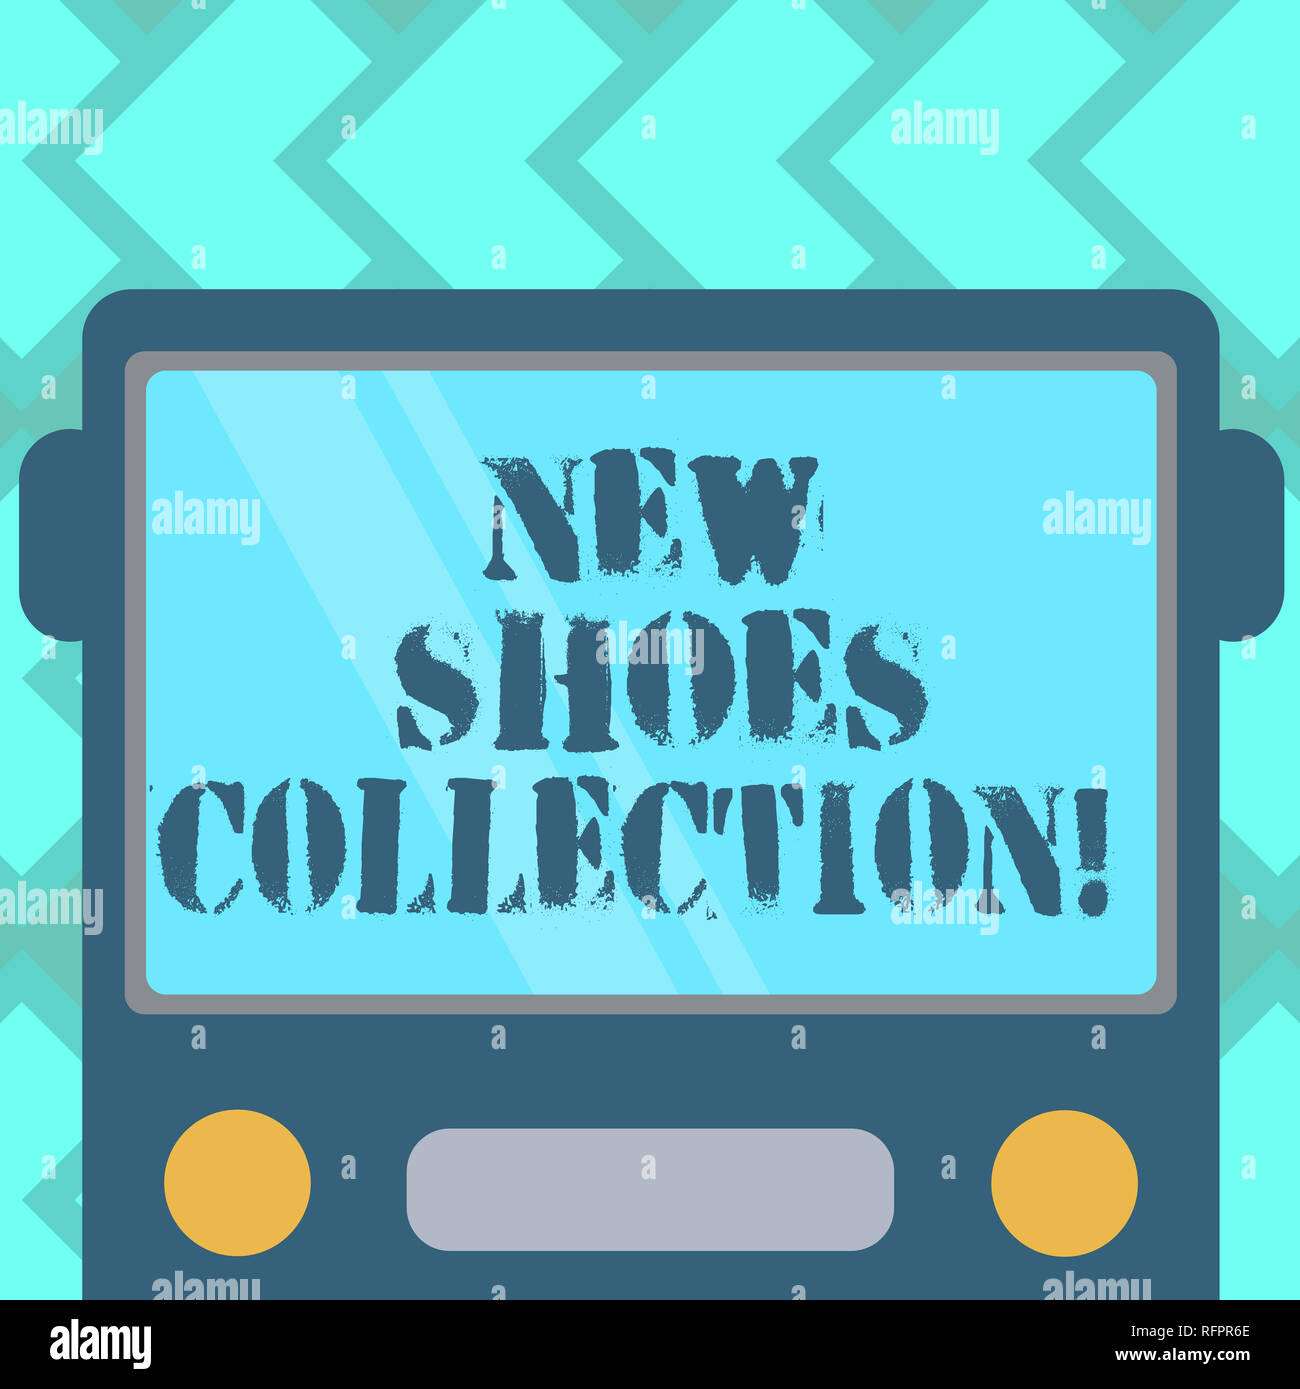 Text sign showing New Shoes Collection. Conceptual photo The process or passion of collecting new footwear Drawn Flat Front View of Bus with Blank Col Stock Photo